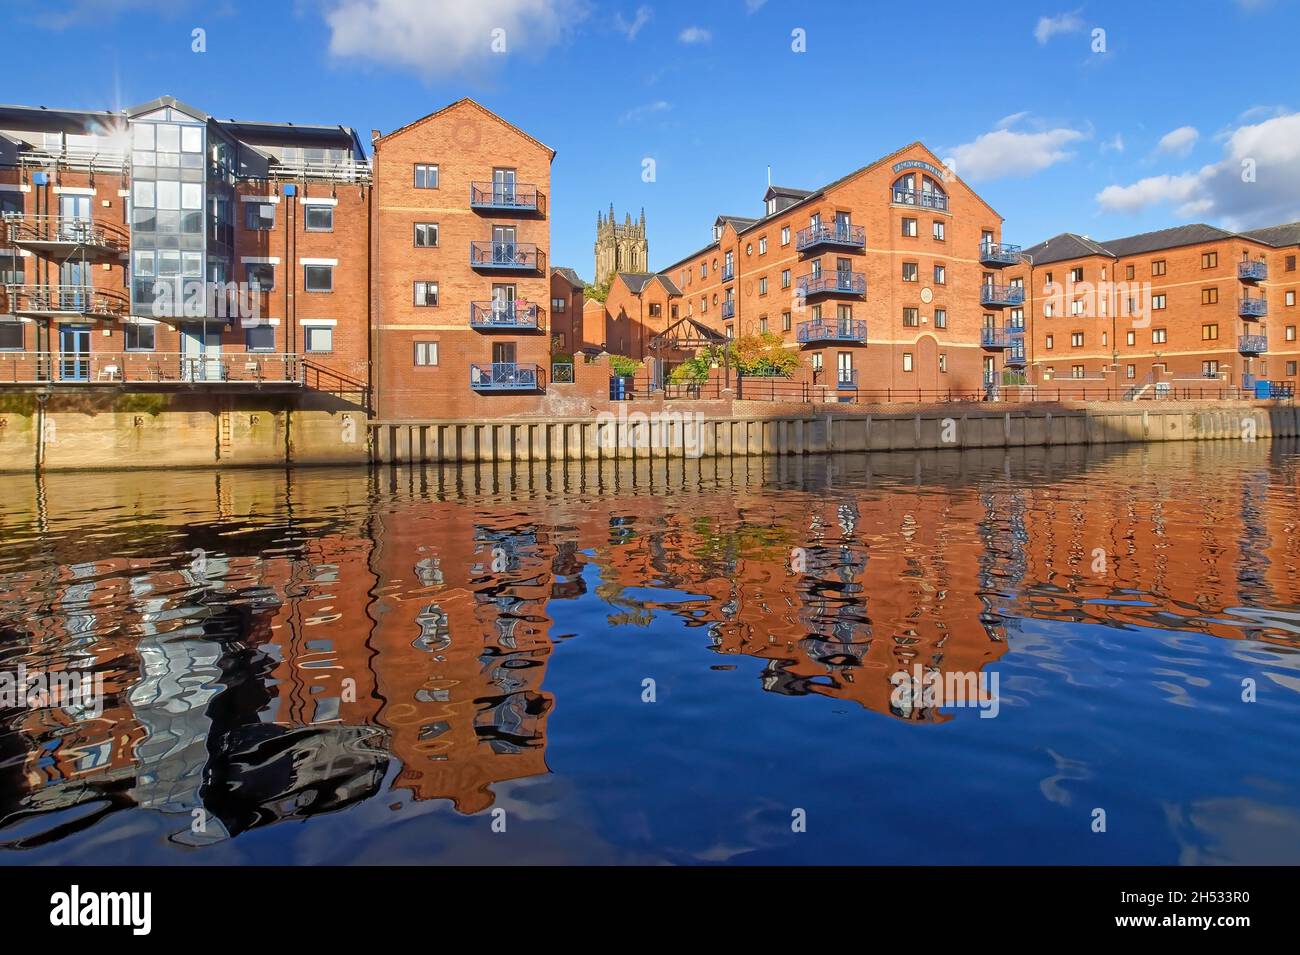 UK, West Yorkshire, Leeds, South Face of Leeds Minster and Riverside Apartments on The Calls Stock Photo